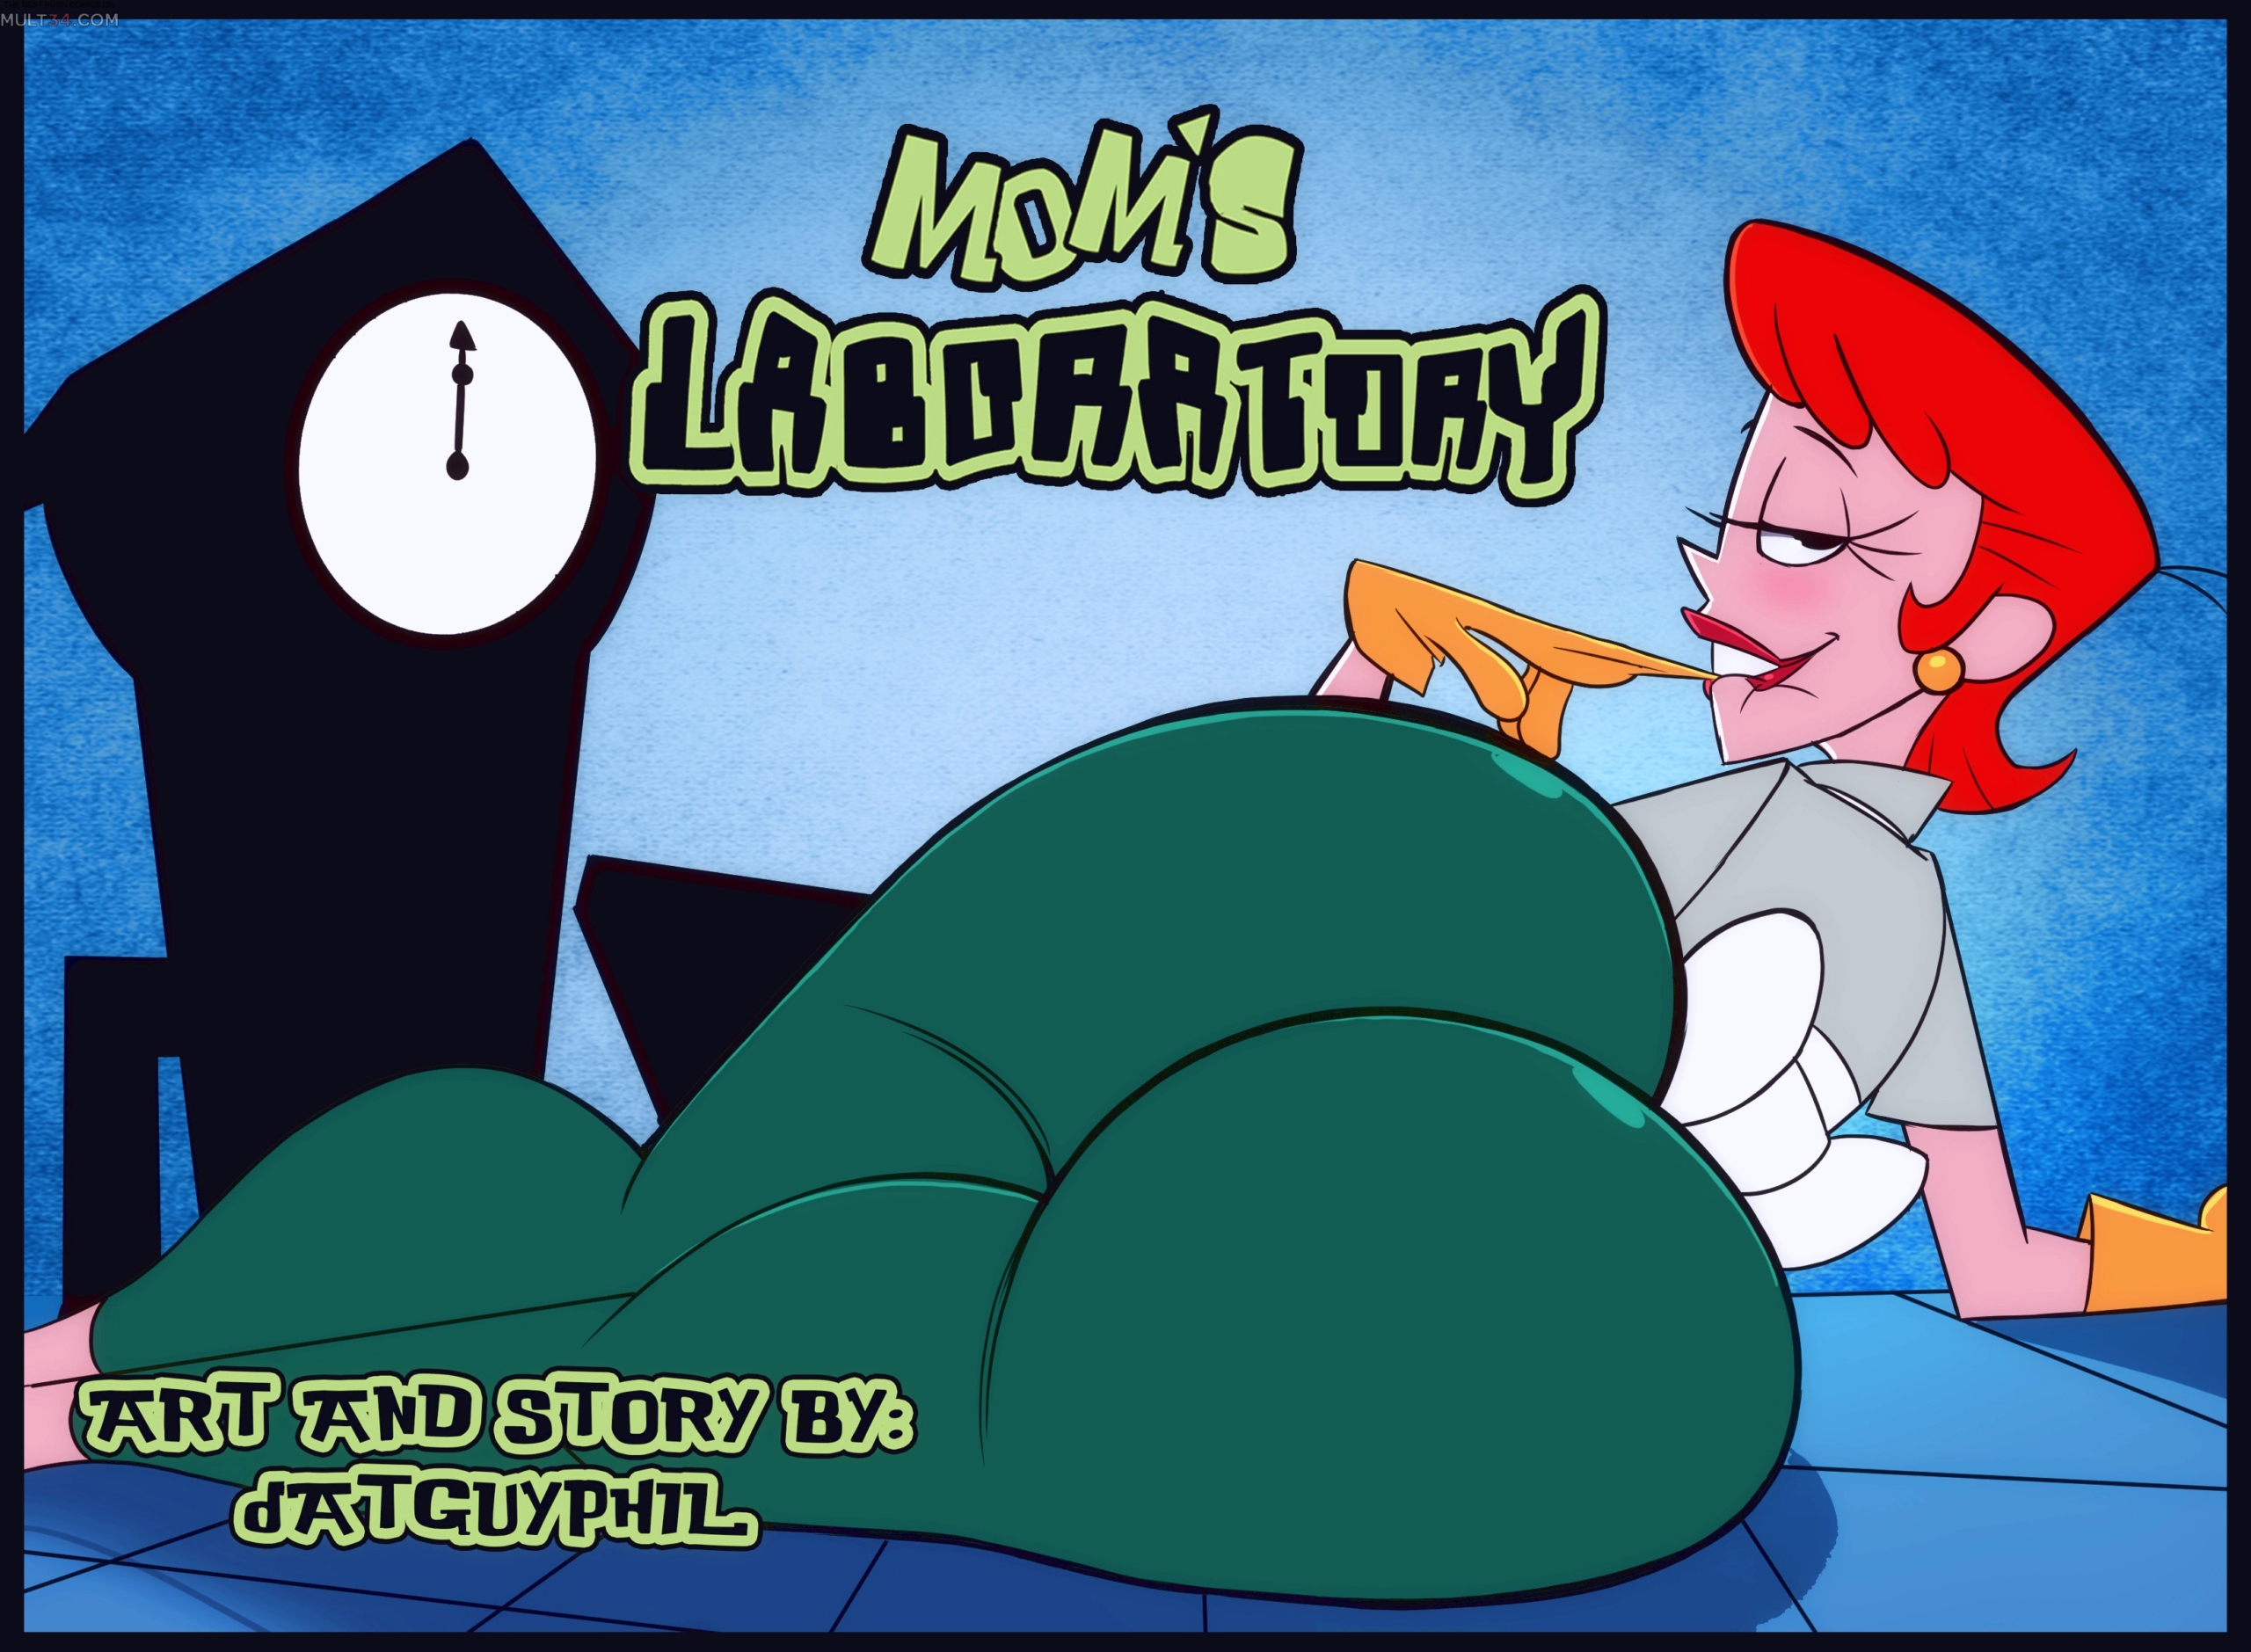 Mom's Laboratory porn comic page 1 on category Dexters Laboratory